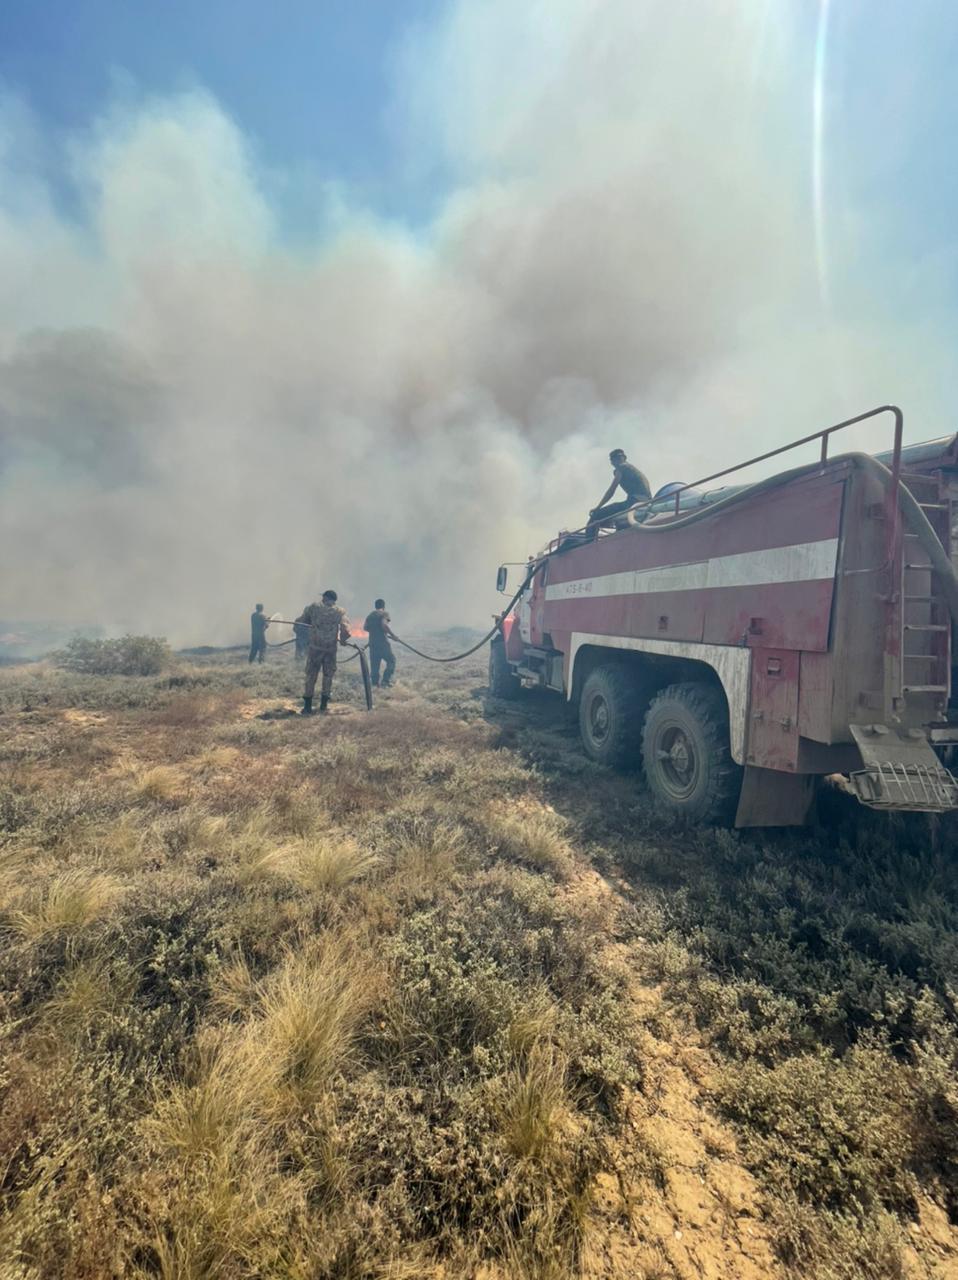 All fires in the Ulytau district have been completely eliminated